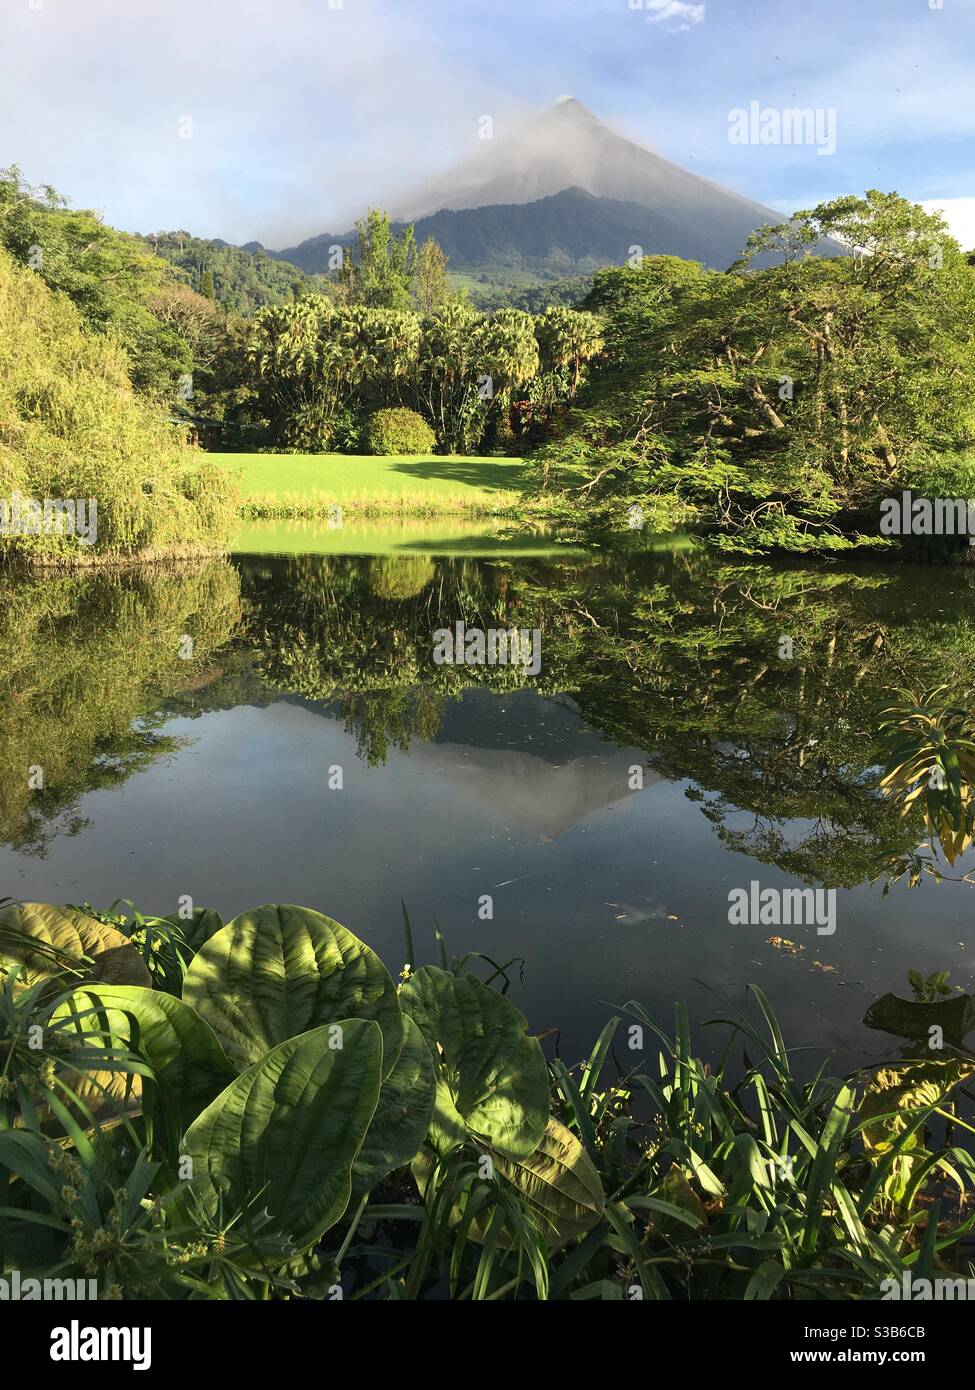 Guatemalan botanical gardens with a volcano view Stock Photo